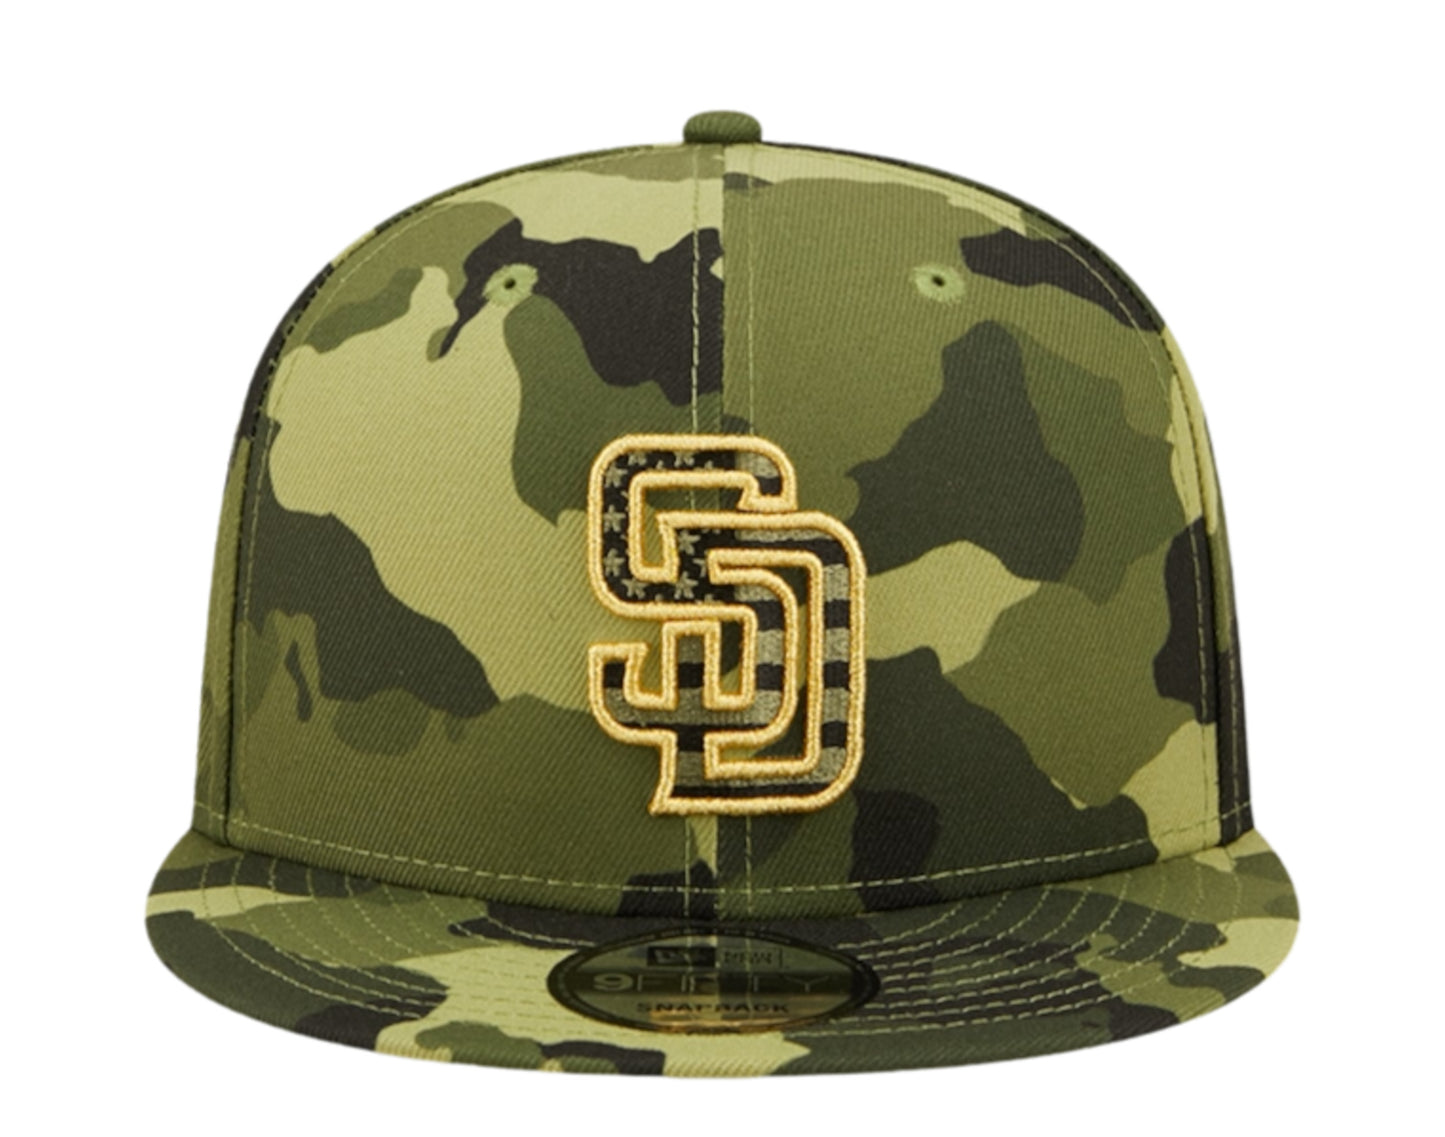 New Era 9Fifty MLB San Diego Padres Armed Forces Weekend Snapback Hat